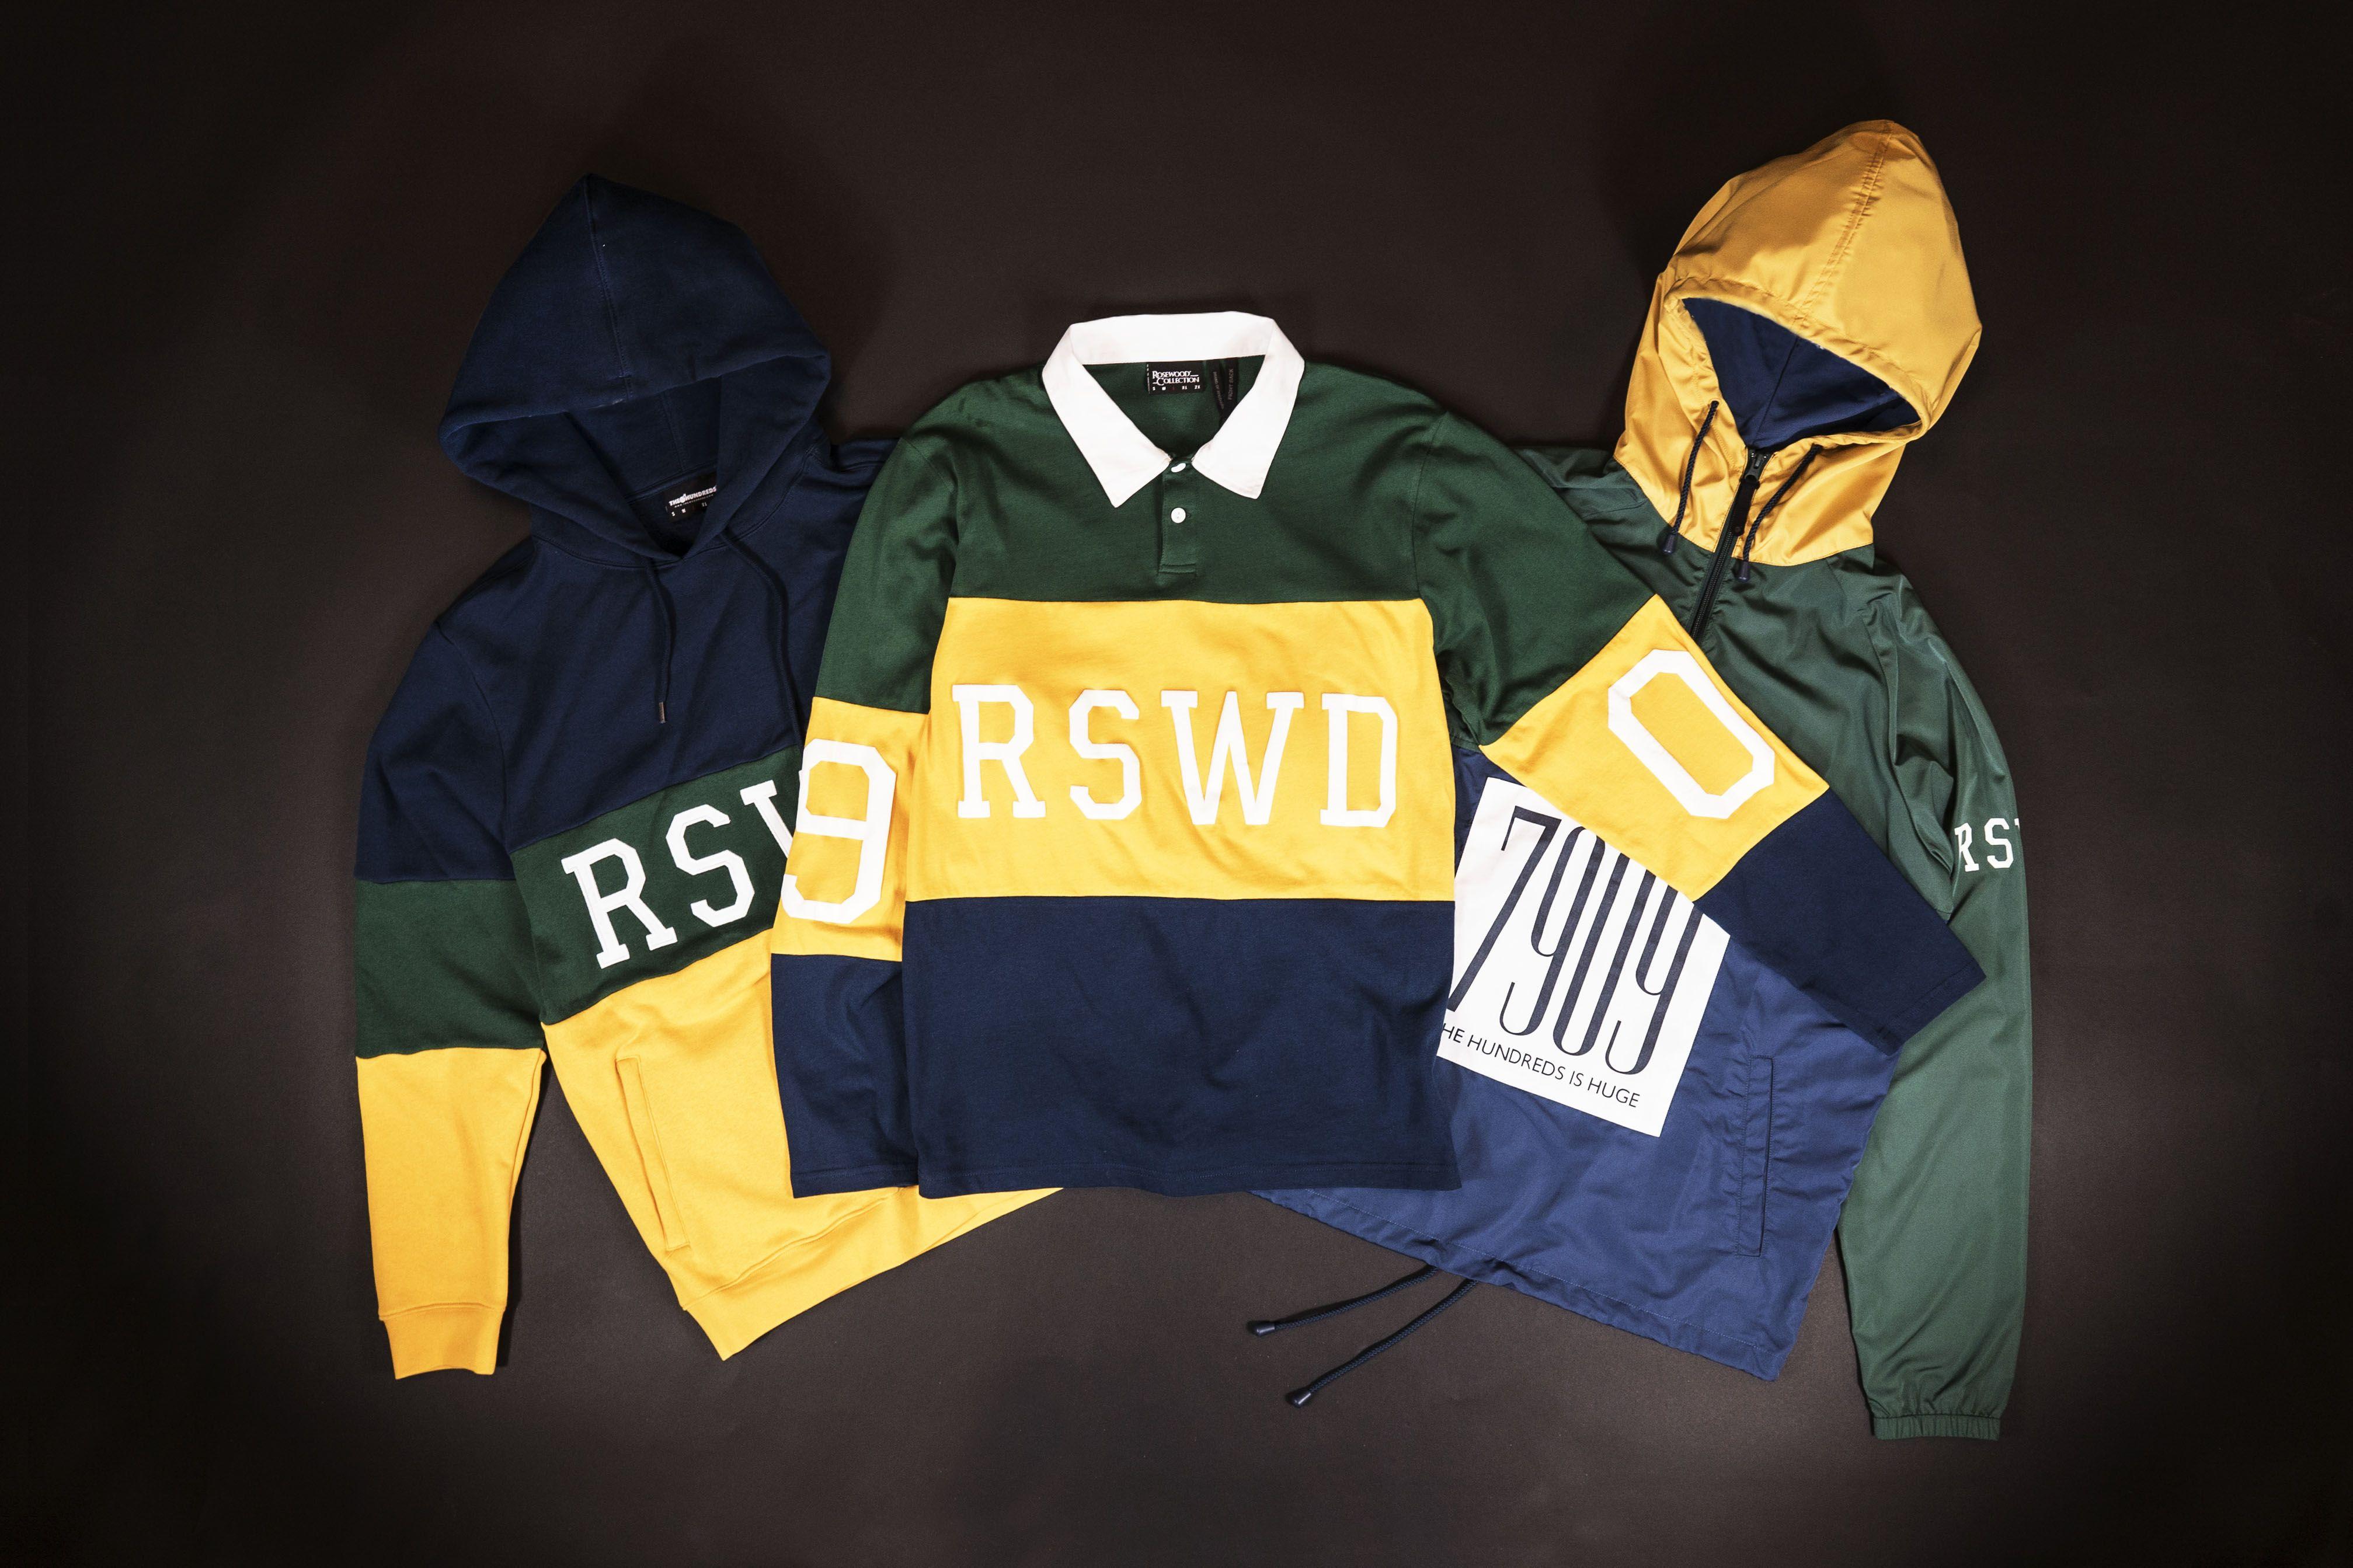 Only the The Hundreds Logo - RSWD10 :: Celebrating Our 10 Years on Rosewood - The Hundreds